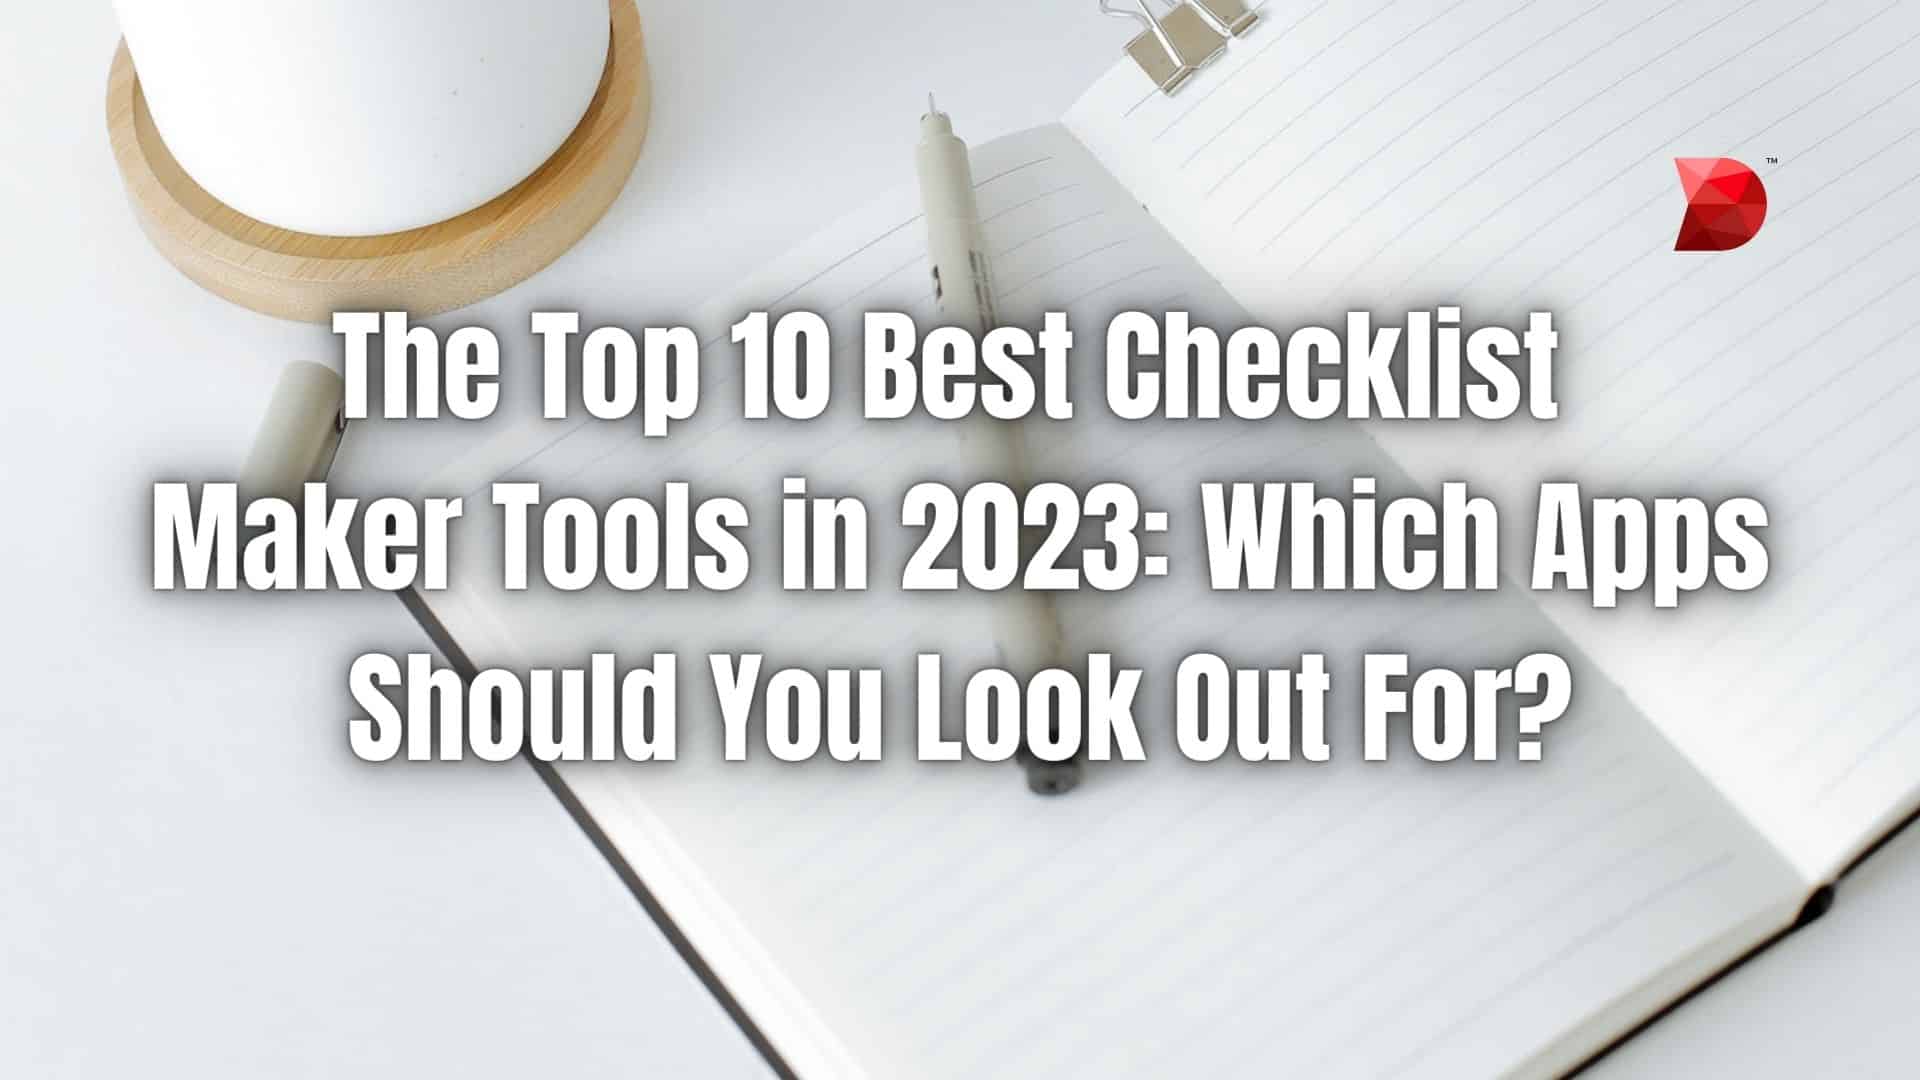 The Top 10 Best Checklist Tools in -